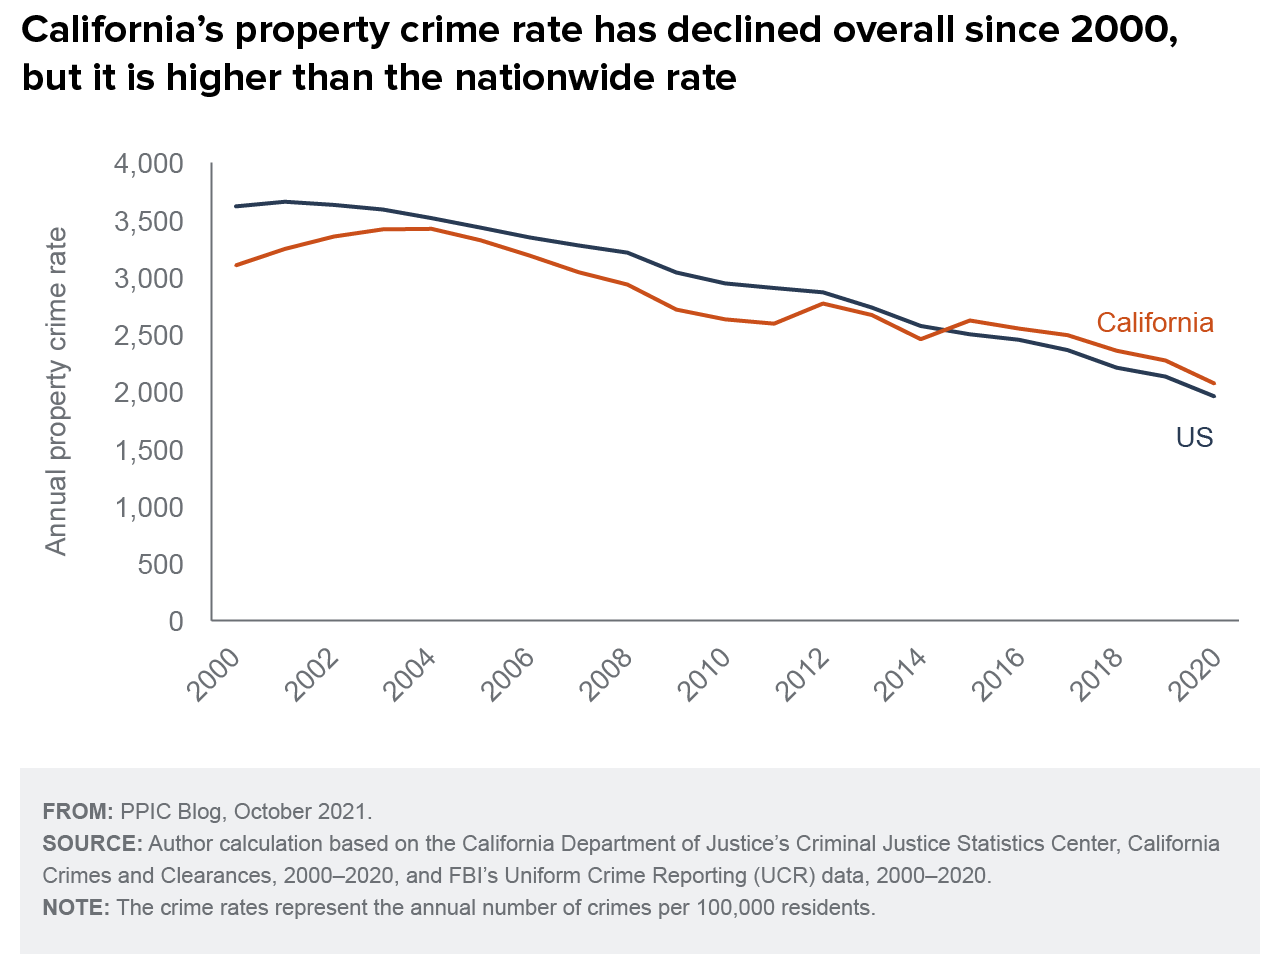 figure - California’s property crime rate has declined overall since 2000, but it is higher than the nationwide rate